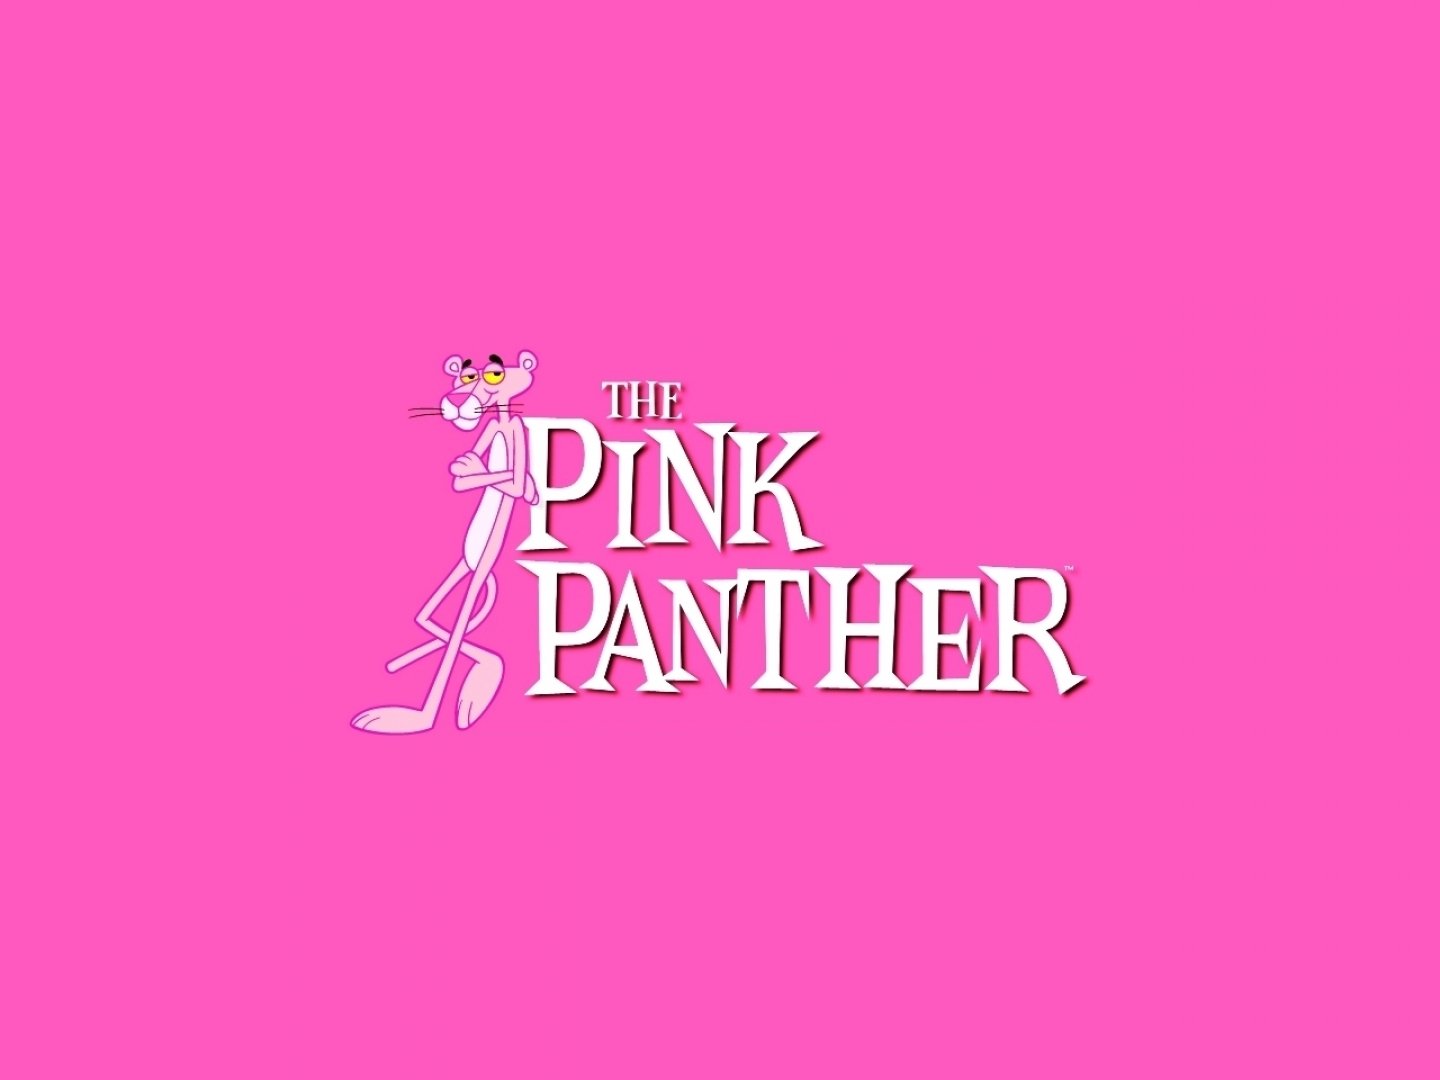 The Pink Panther Show Wallpaper